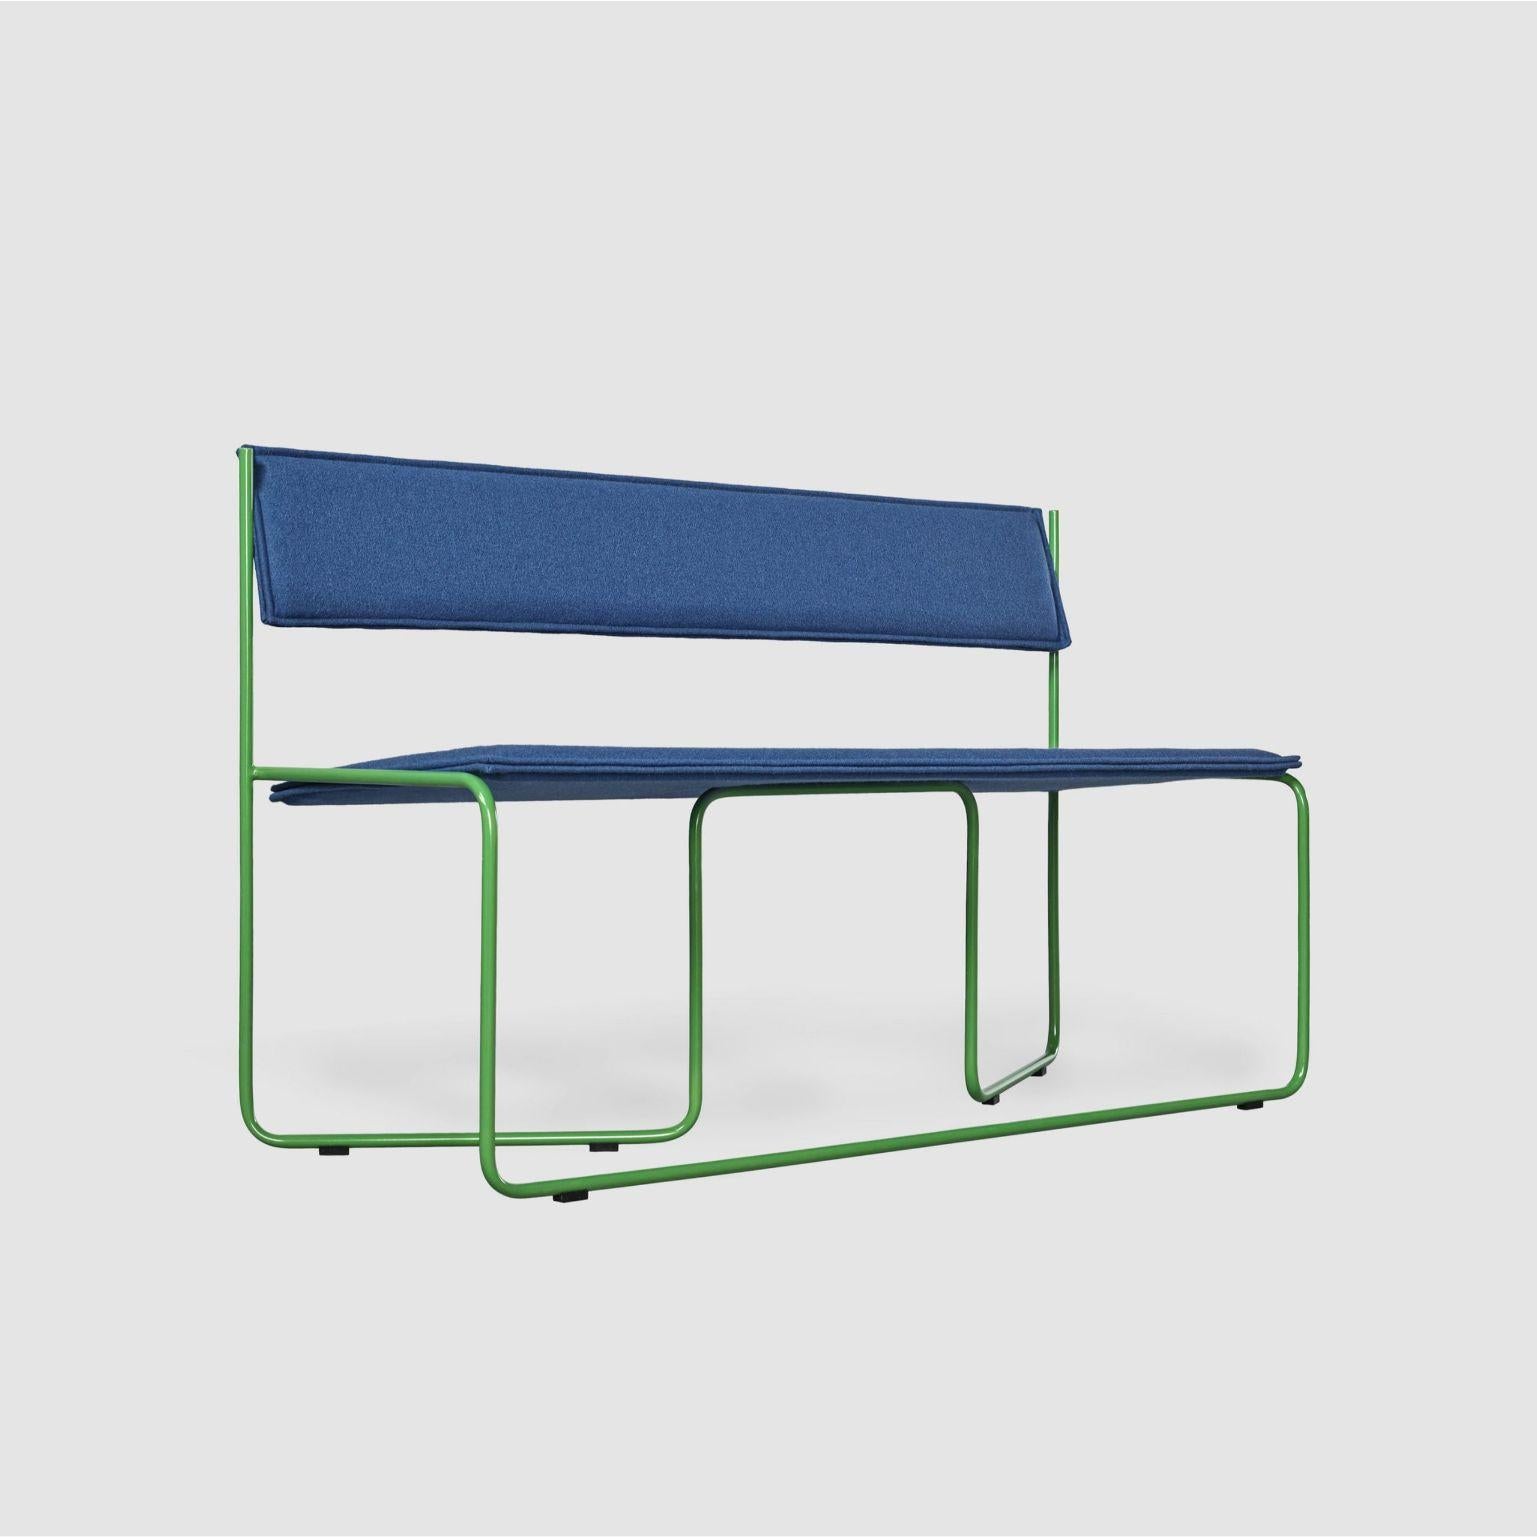 Trampolín bench - Blue by Cuatro Cuatros
Dimensions: W135, D49, H83, Seat 44
Materials: Chrome plated or painted iron structure
Foam CMHR (high resilience and flame retardant) for all our cushion filling systems
Removable backrest and seat